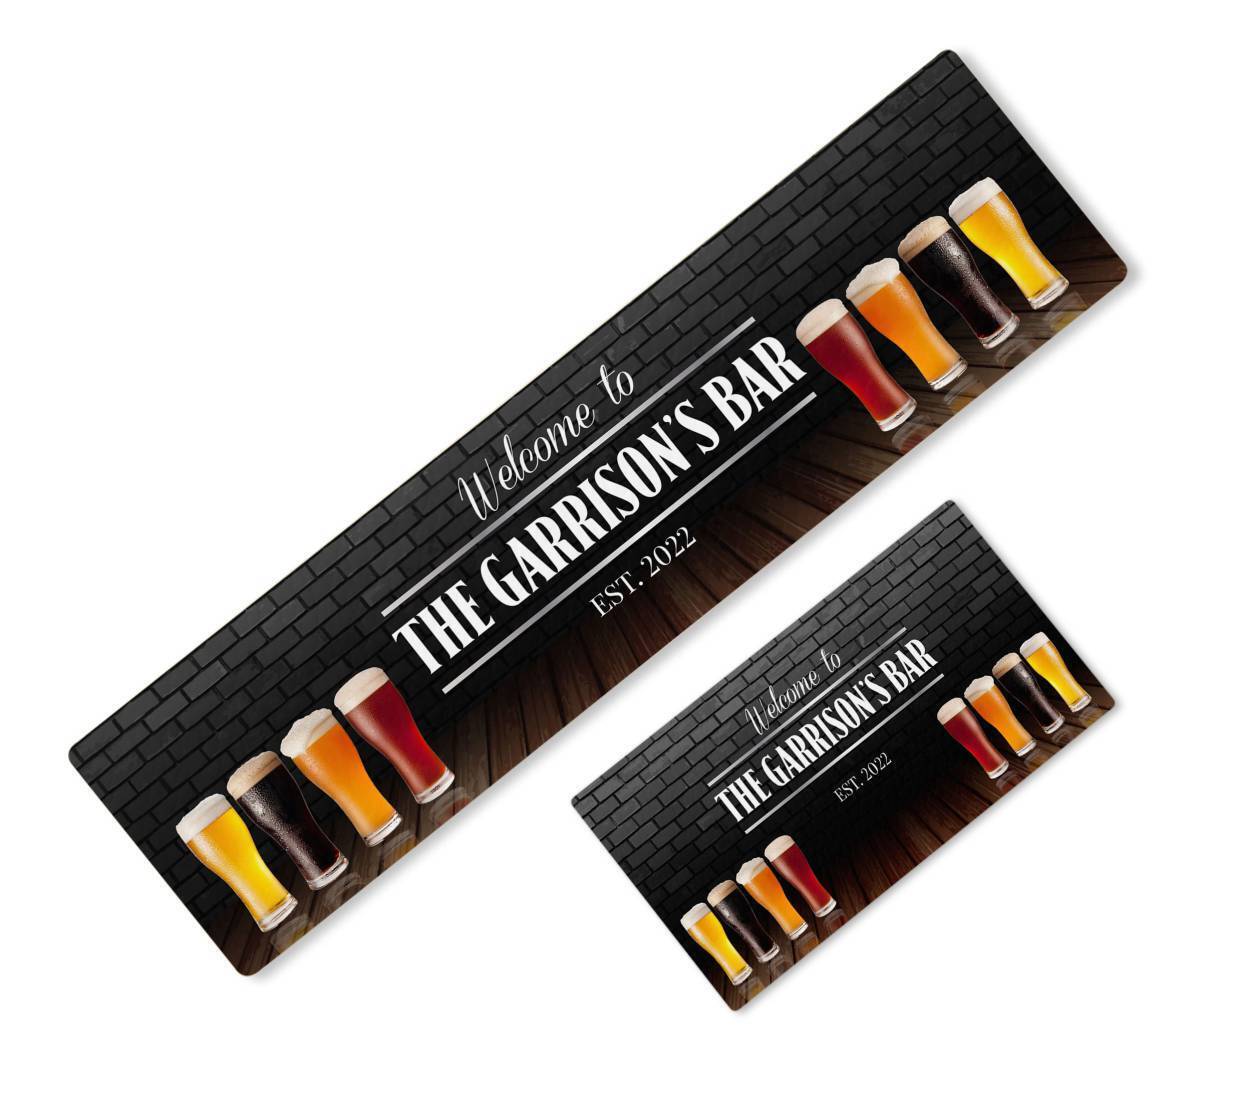 Personalised Any Text Beer Mat Label Bar Runner Ideal Home Pub Cafe Occasion 29